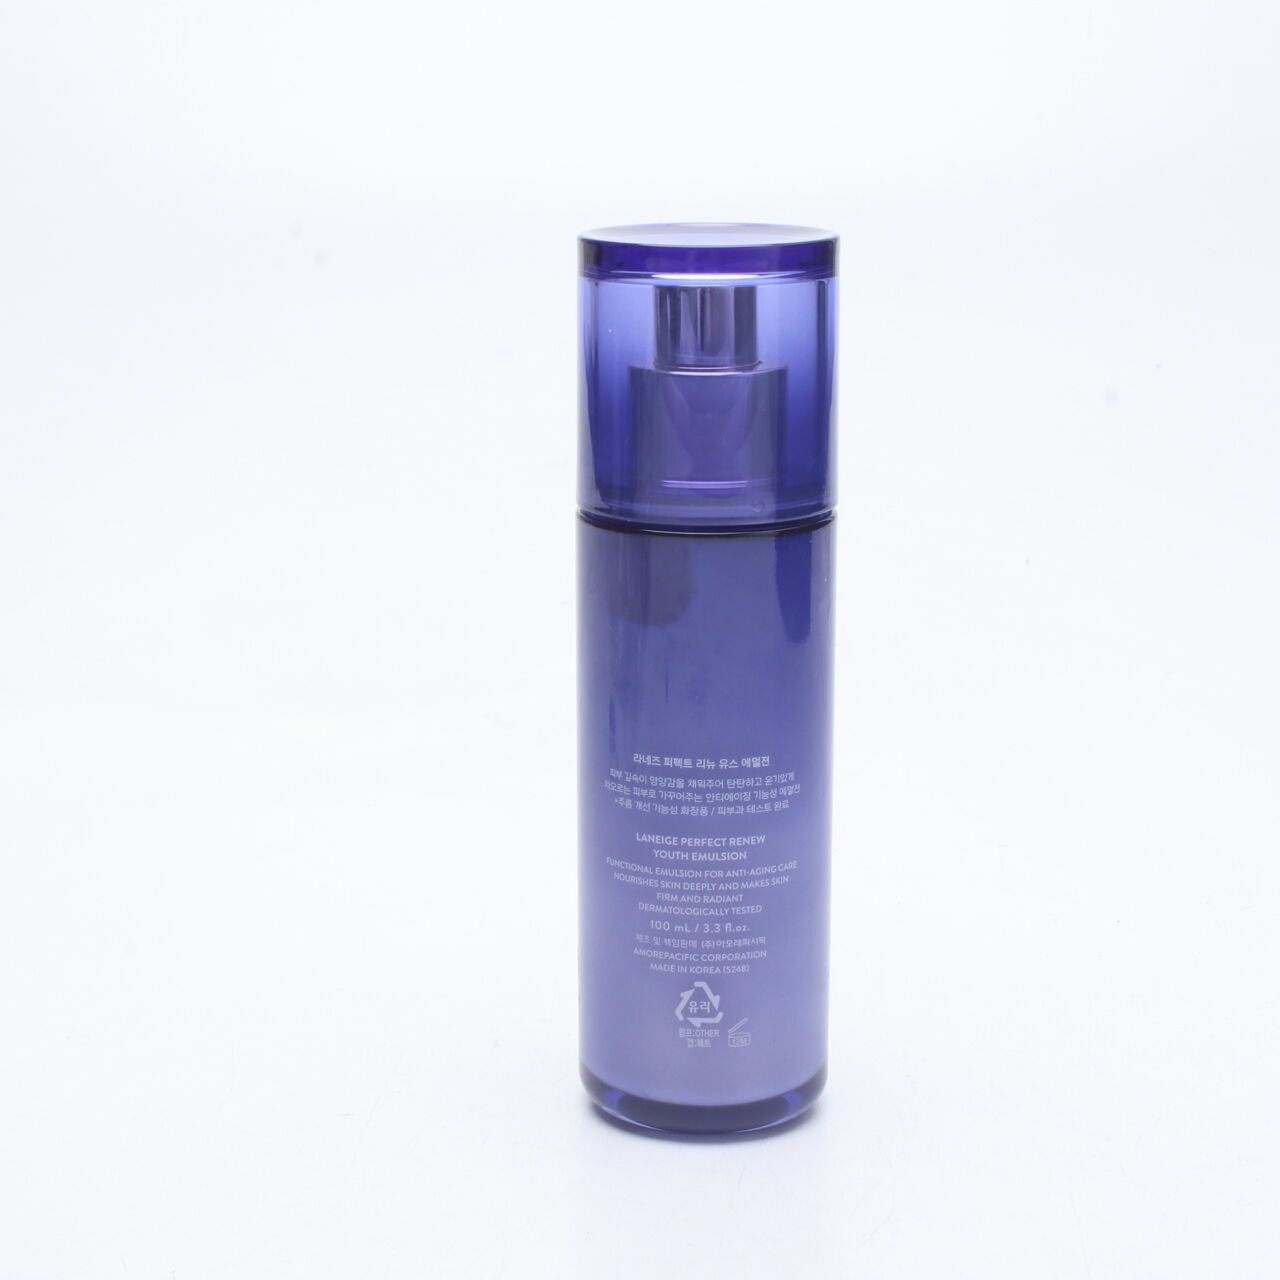 Laneige Perfect Renew Youth Emulsion Skin Care